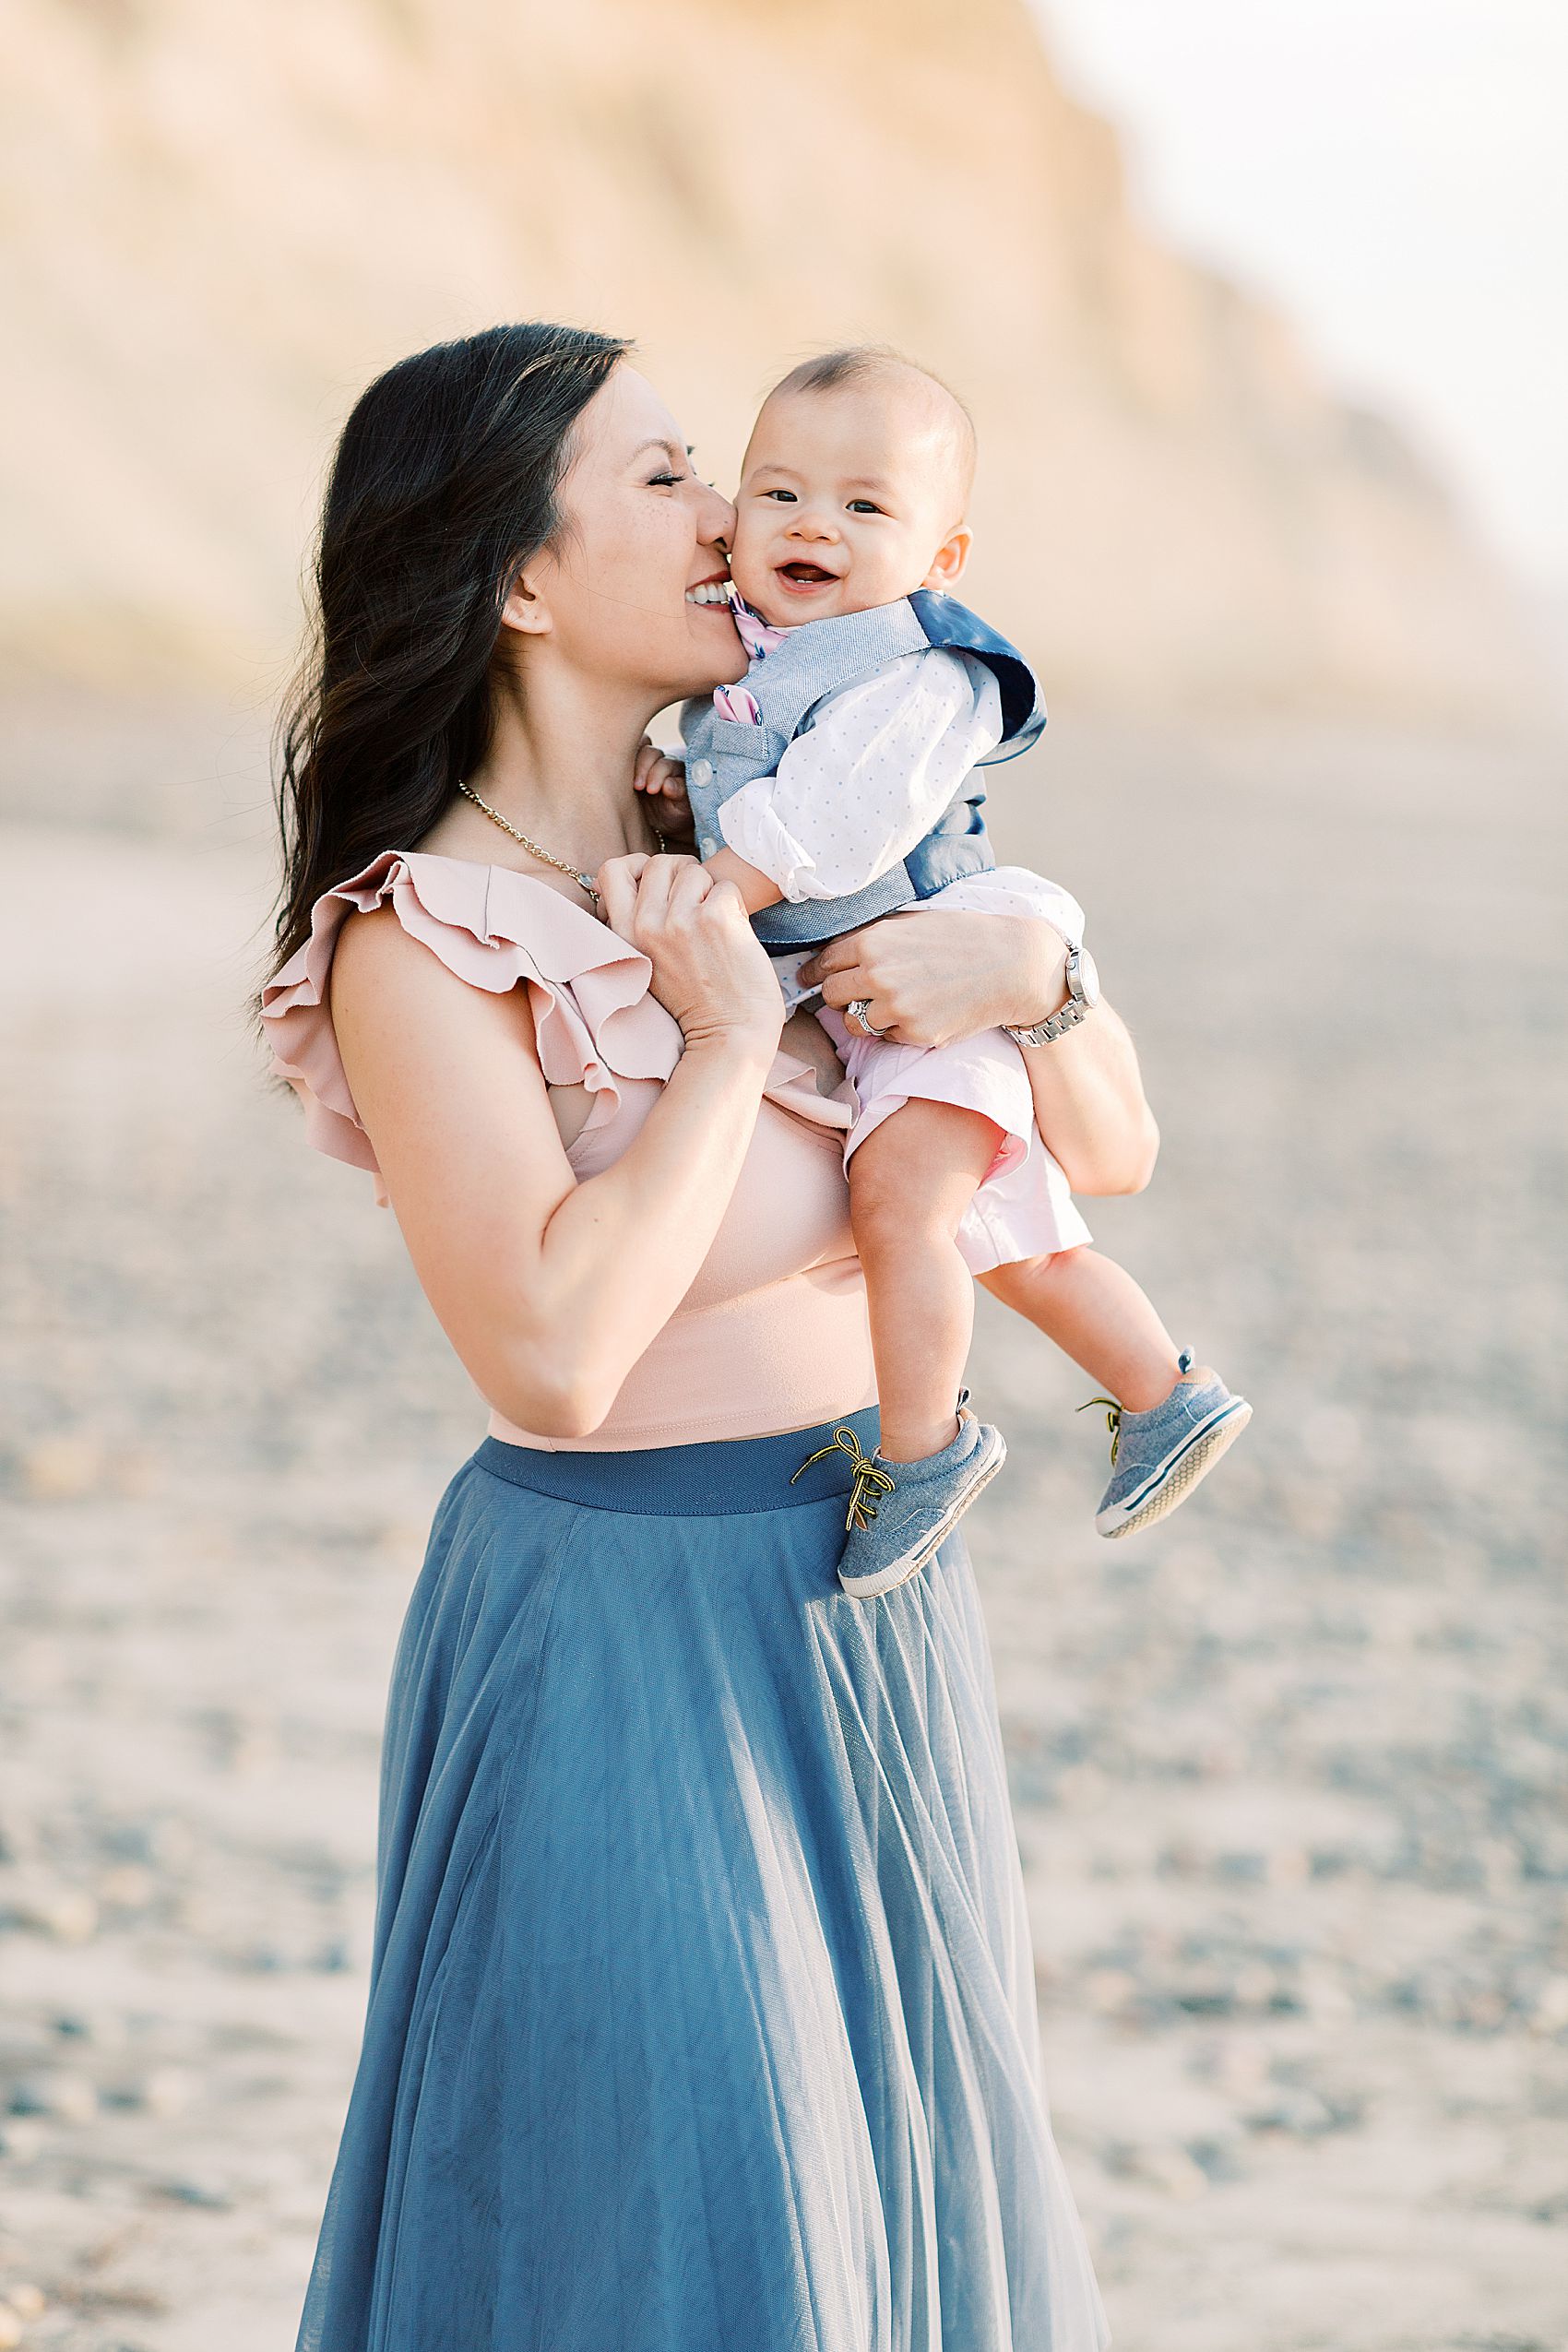 mommy and me photo ideas